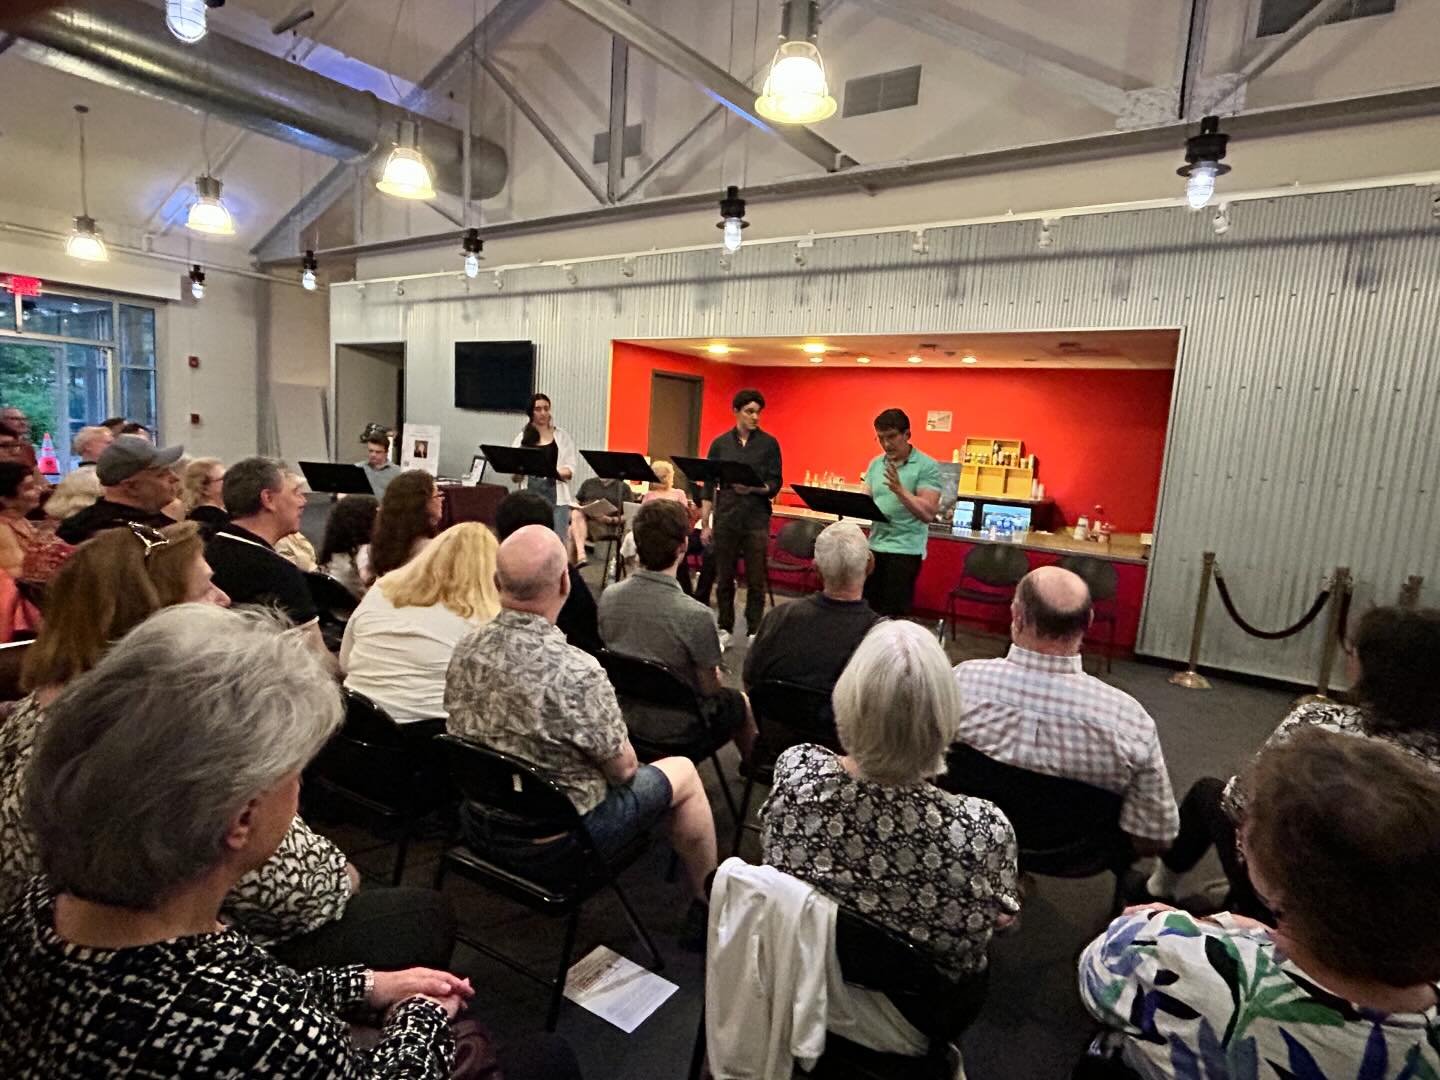 Thanks to the large enthusiastic audience who came to our Monday Night play reading last night of Peter Filichia&rsquo;s &ldquo;Larry The Big Time Broadway Producer.&rdquo; A lively Q&amp;A with Peter, director Joe Mancuso and the cast followed. #ame